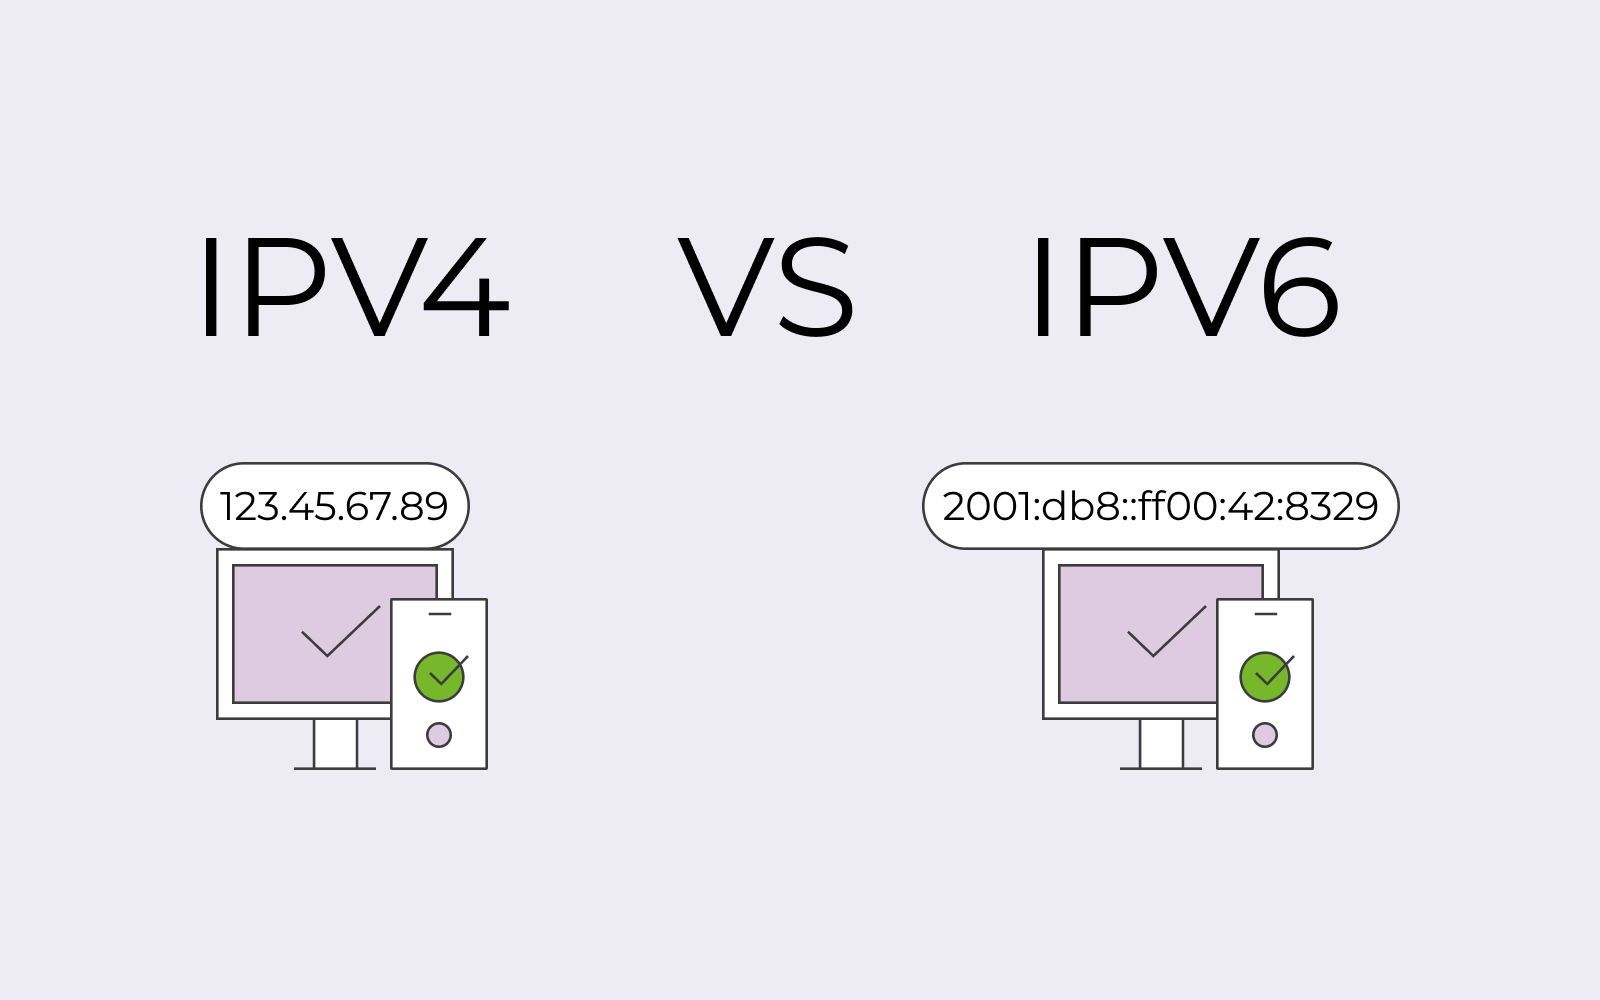 ipv6 for assignments